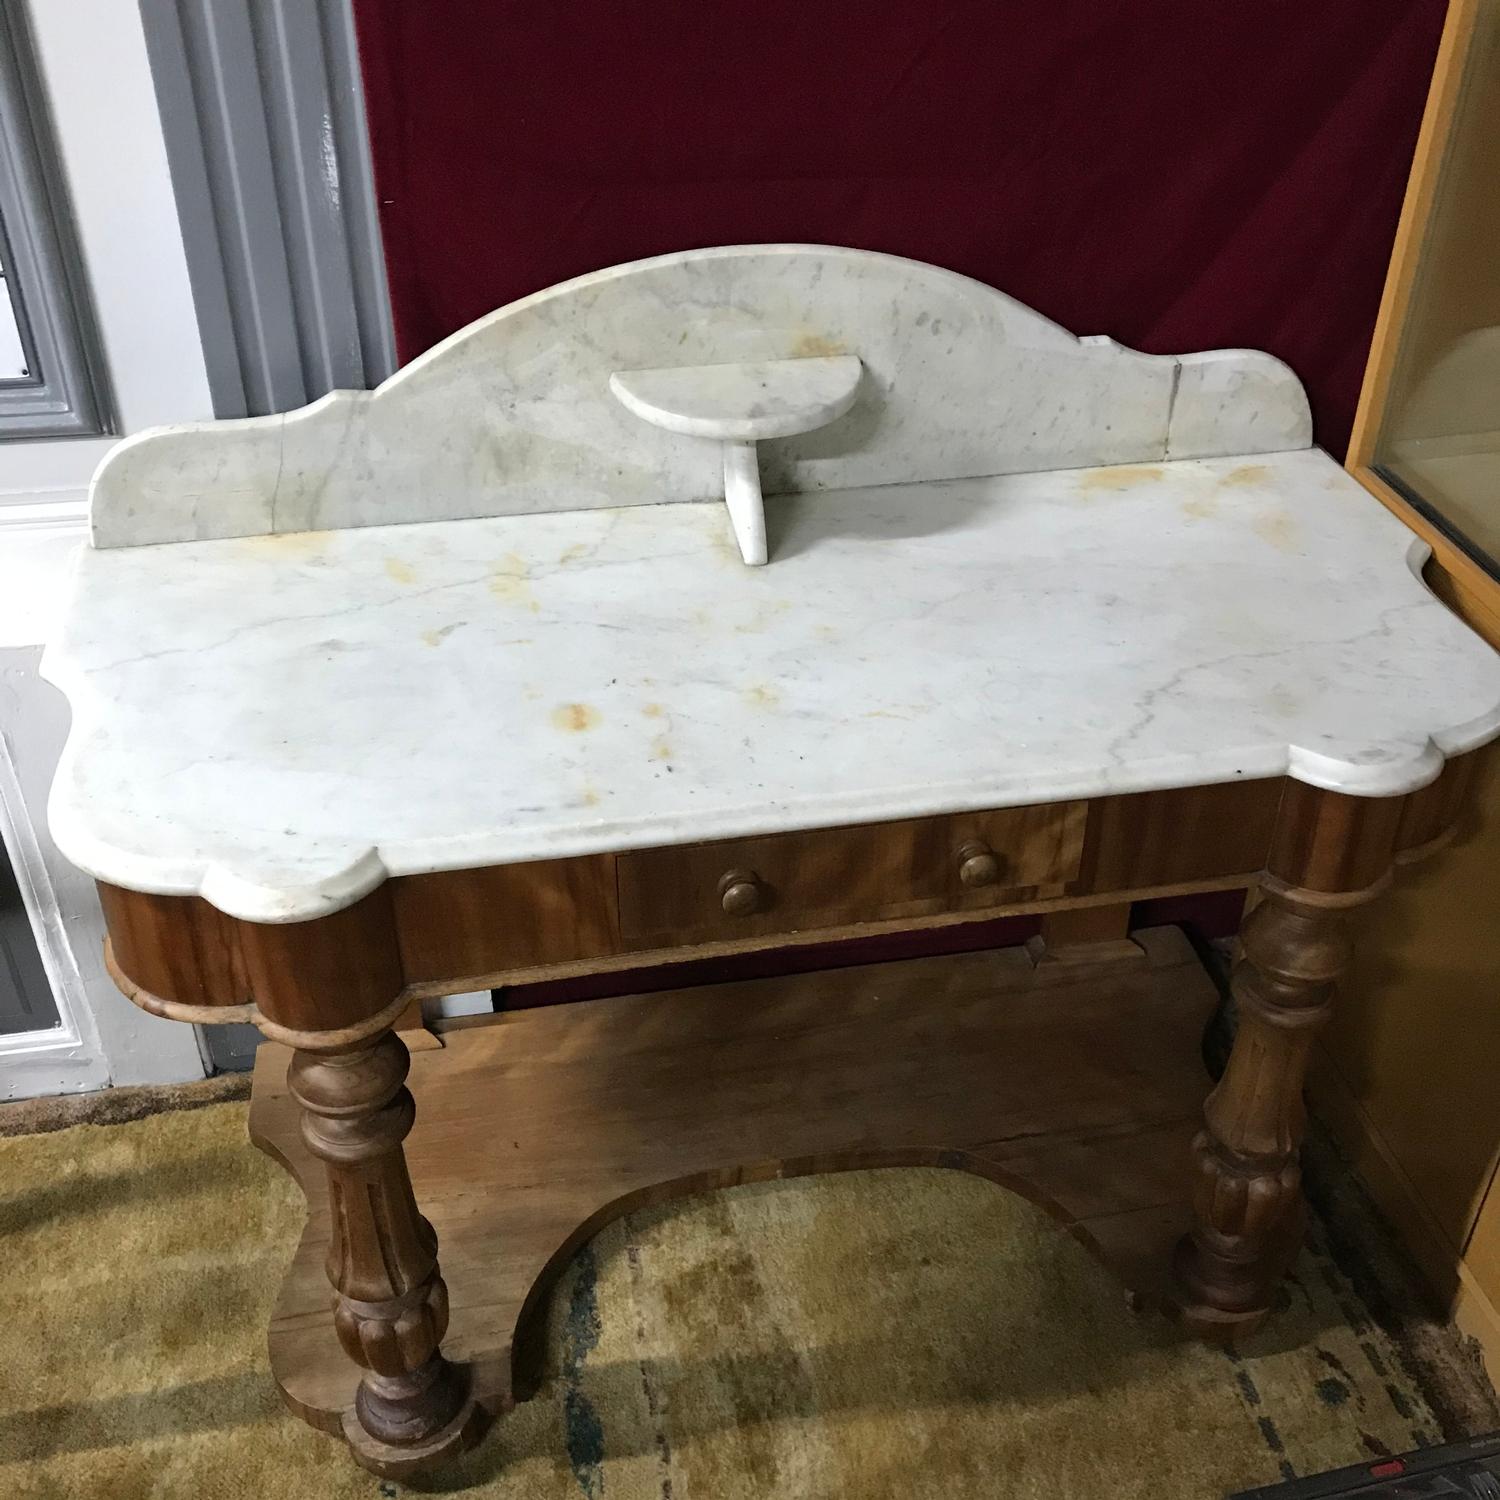 A Victorian Console table, Table top is made of solid marble. Originally used as a wash stand. Has